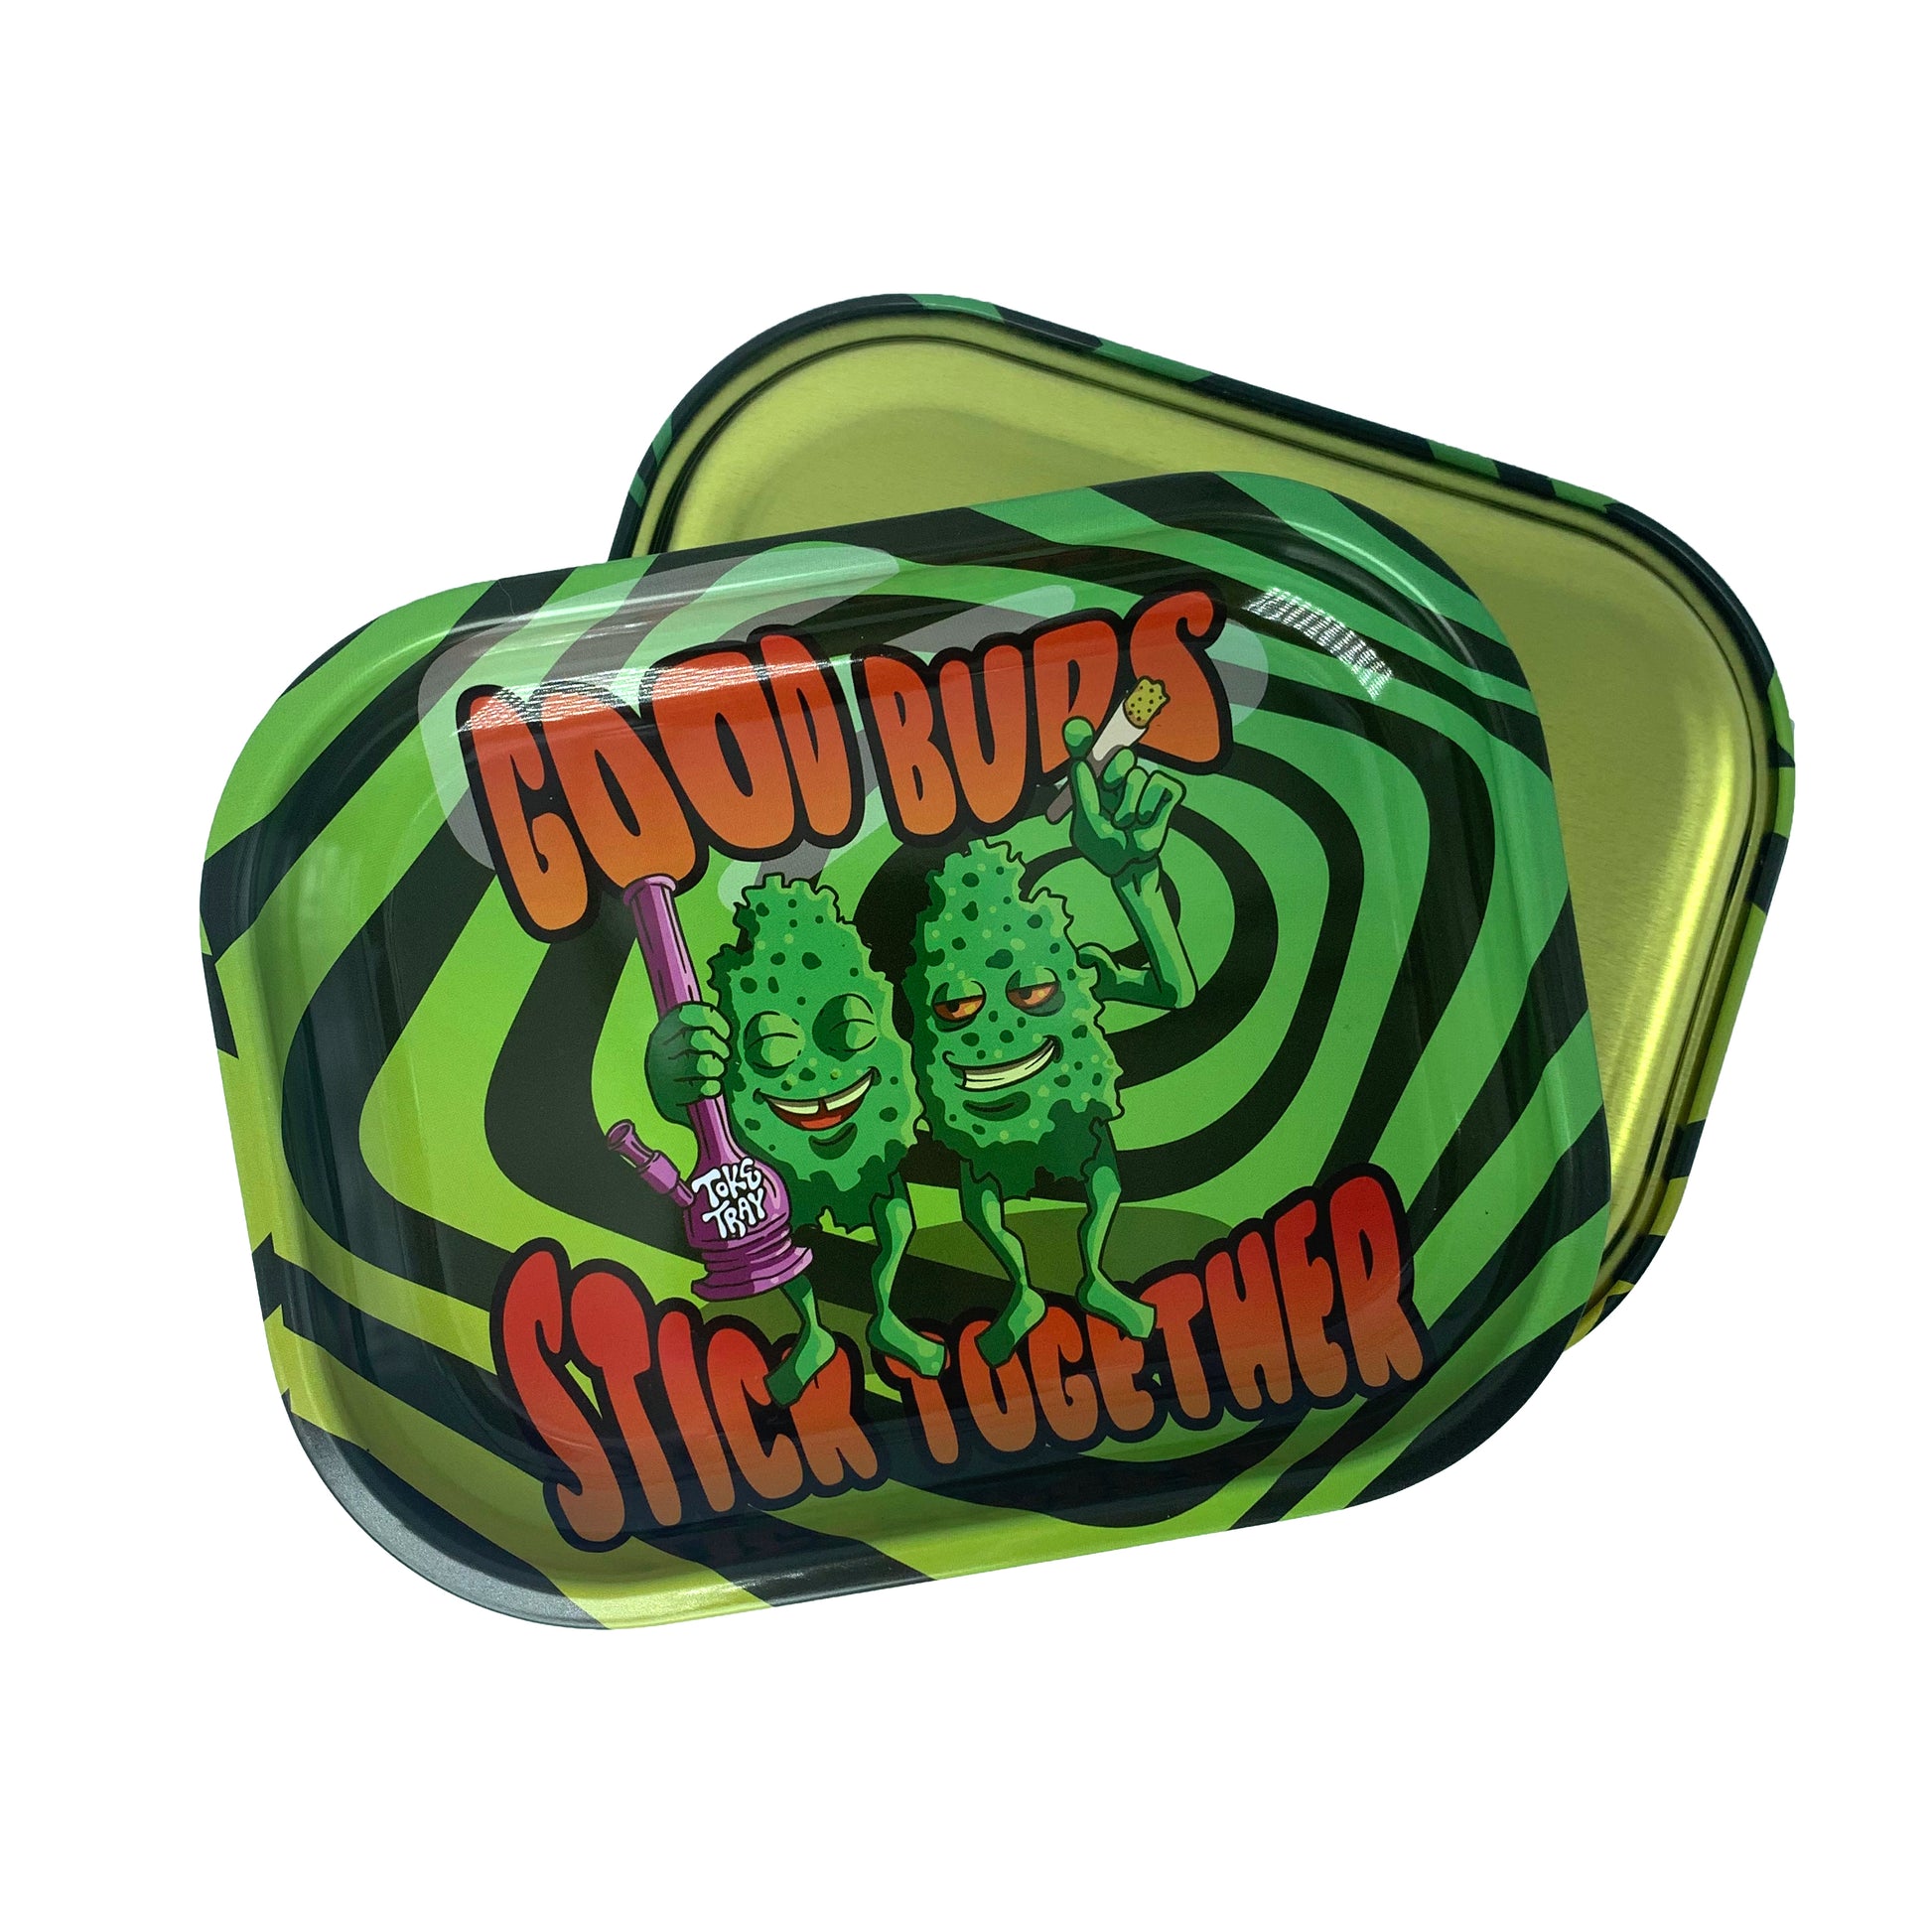 Best Buds Trippy Rolling Tray  High Quality Metal Trays – Toke Tray